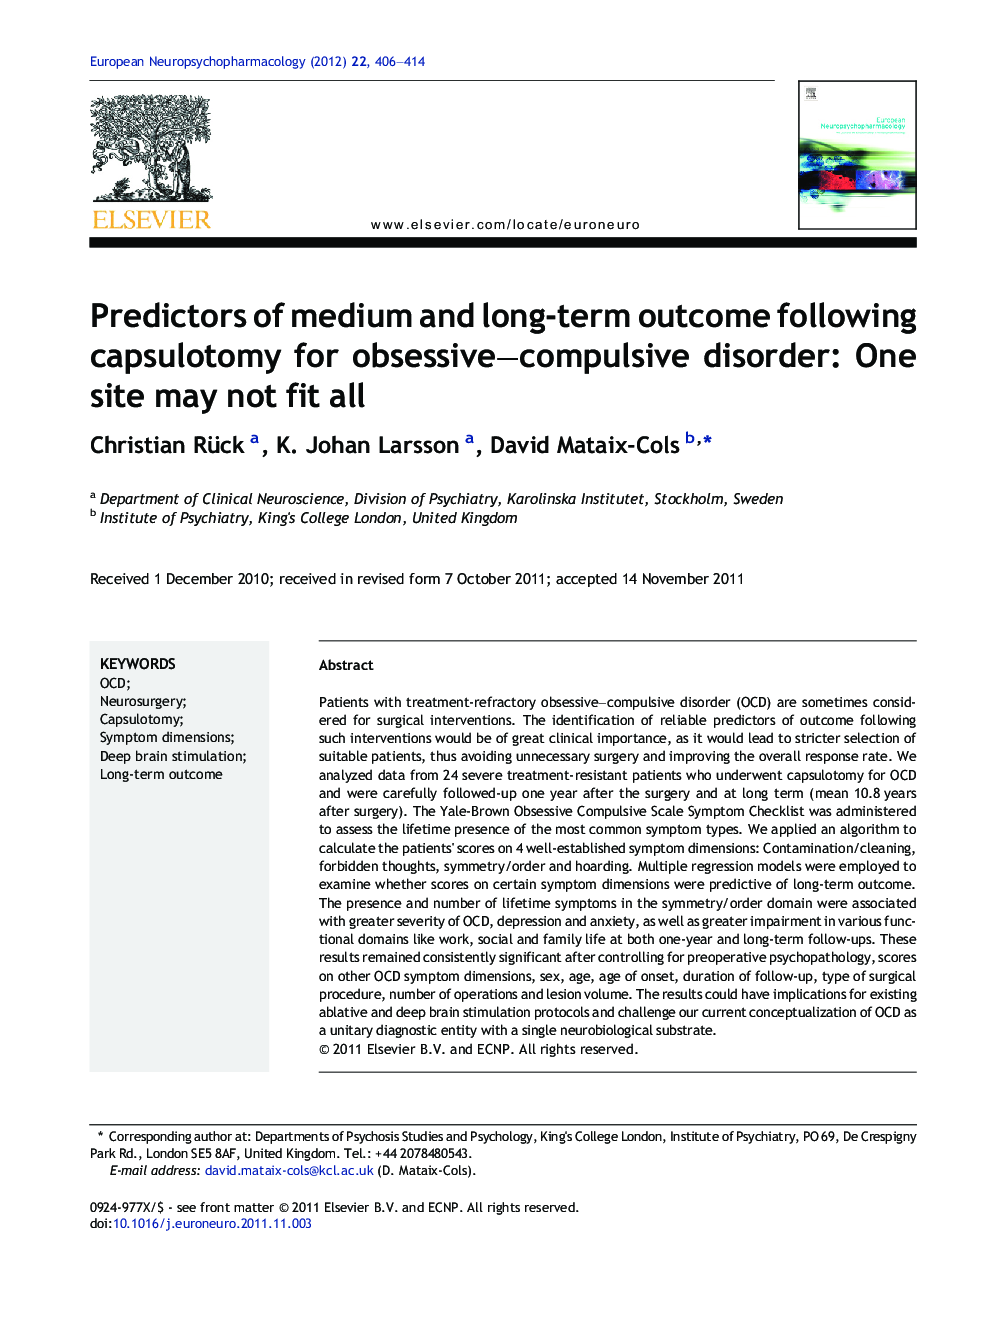 Predictors of medium and long-term outcome following capsulotomy for obsessive–compulsive disorder: One site may not fit all